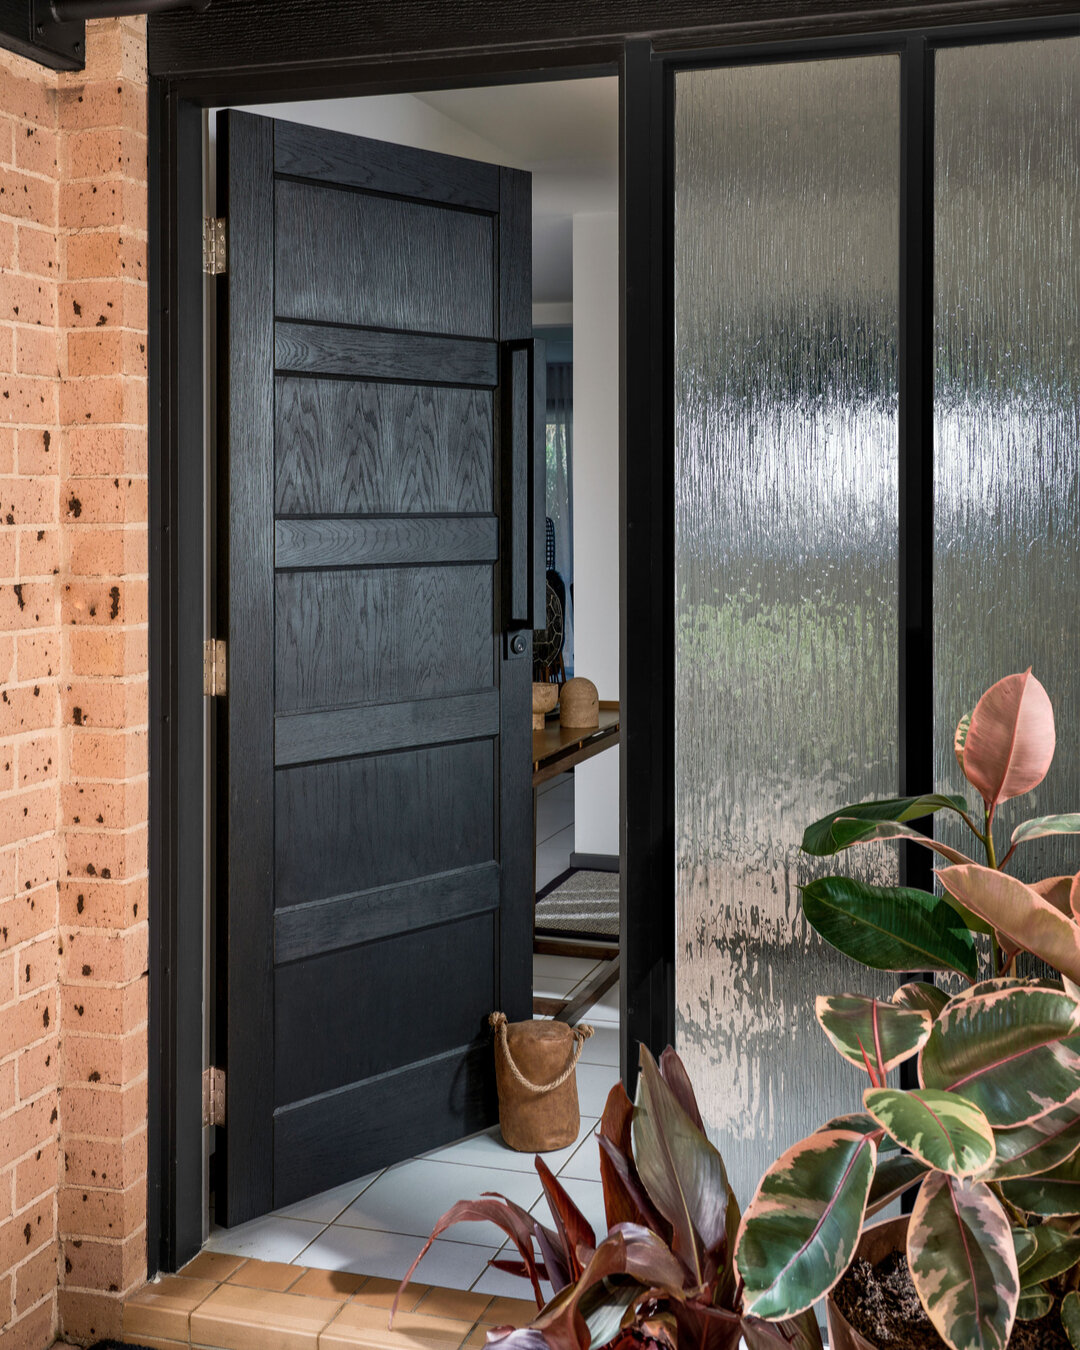 PORT STEPHENS HOUSE II - the journey begins at the striking entry door. Crafted from solid timber with an open grain and stained black, it exudes a sense of timeless beauty and grandeur. As you pass through the door, the foyer opens up, revealing a b